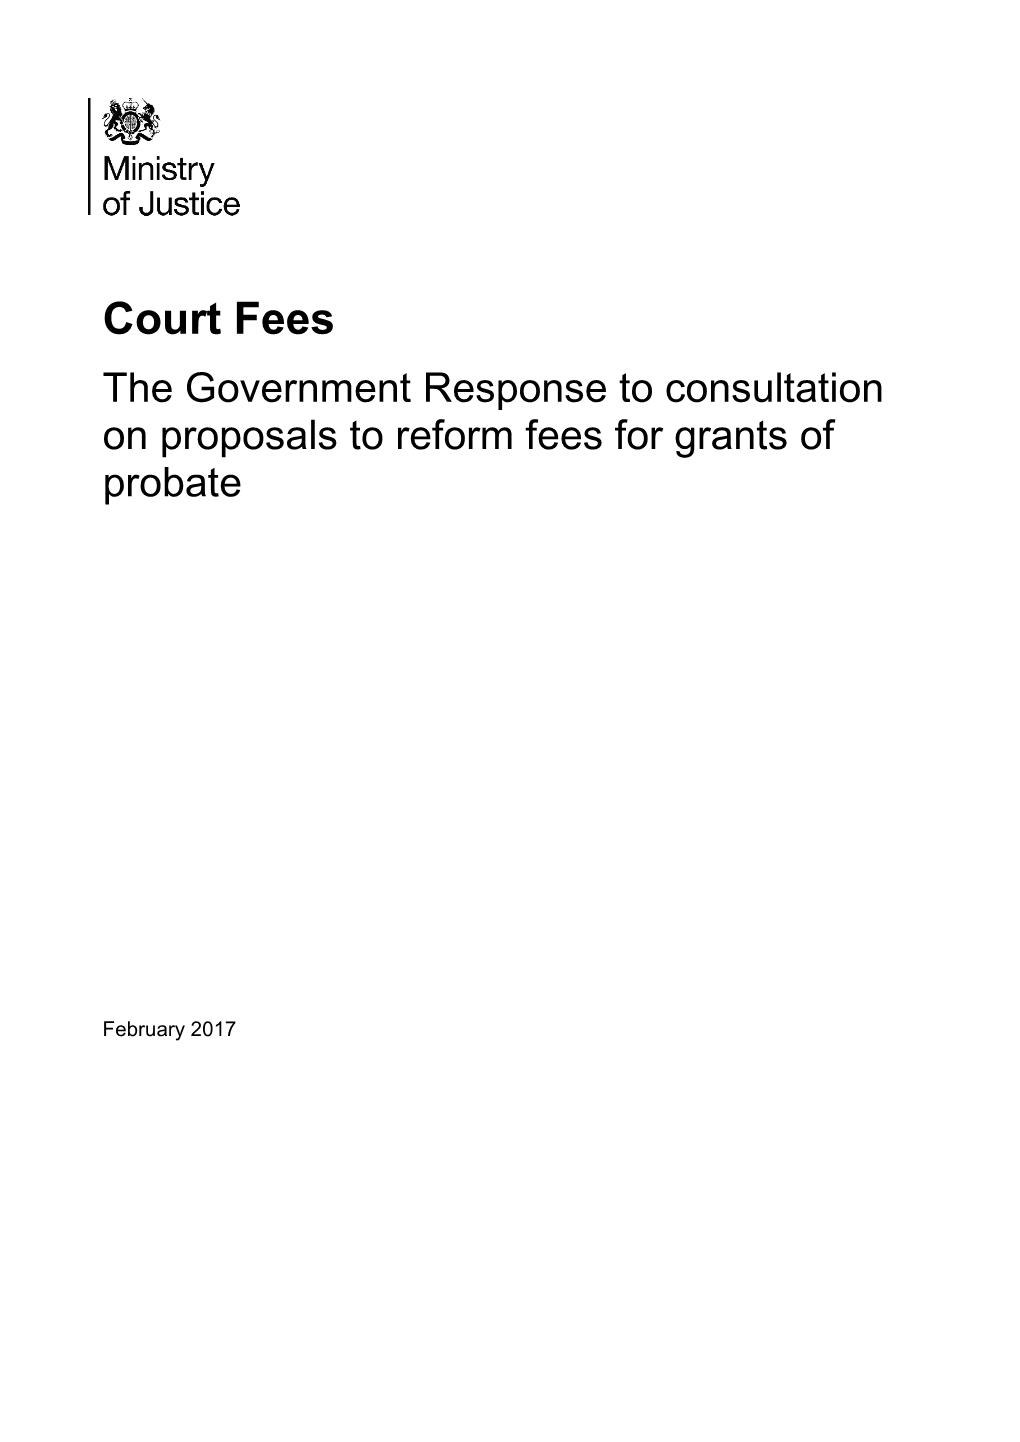 Court Fees the Government Response to Consultation on Proposals to Reform Fees for Grants of Probate